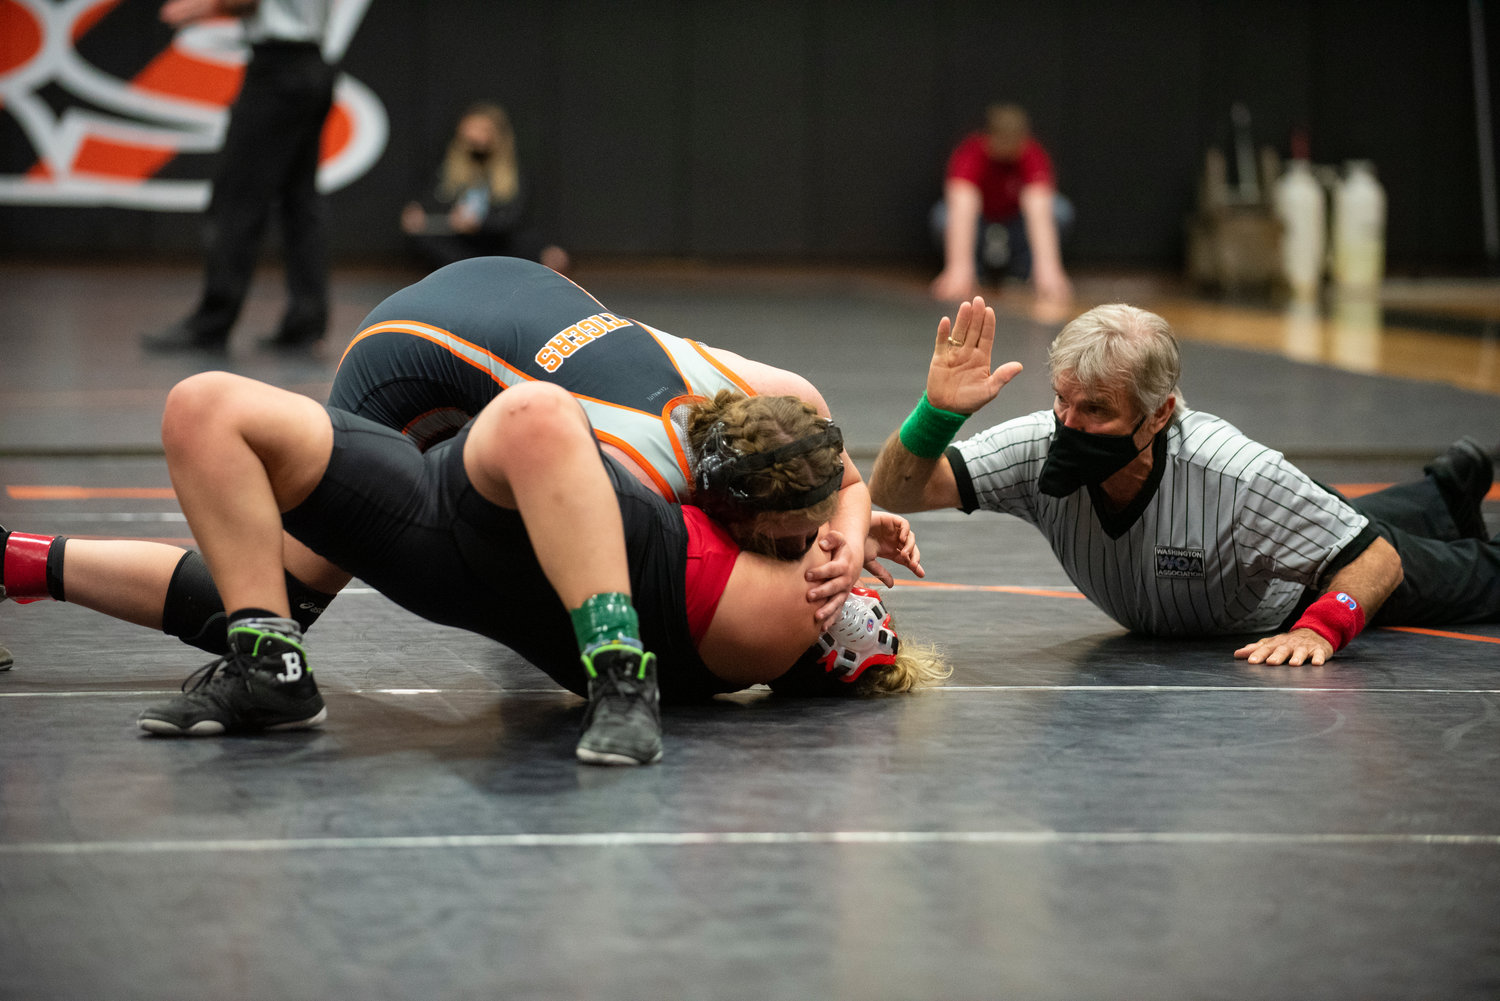 Centralia's Maya Kunkel, top, pins a Black Hills opponent in her first match of a six-team wrestling meet Tuesday in Centralia.